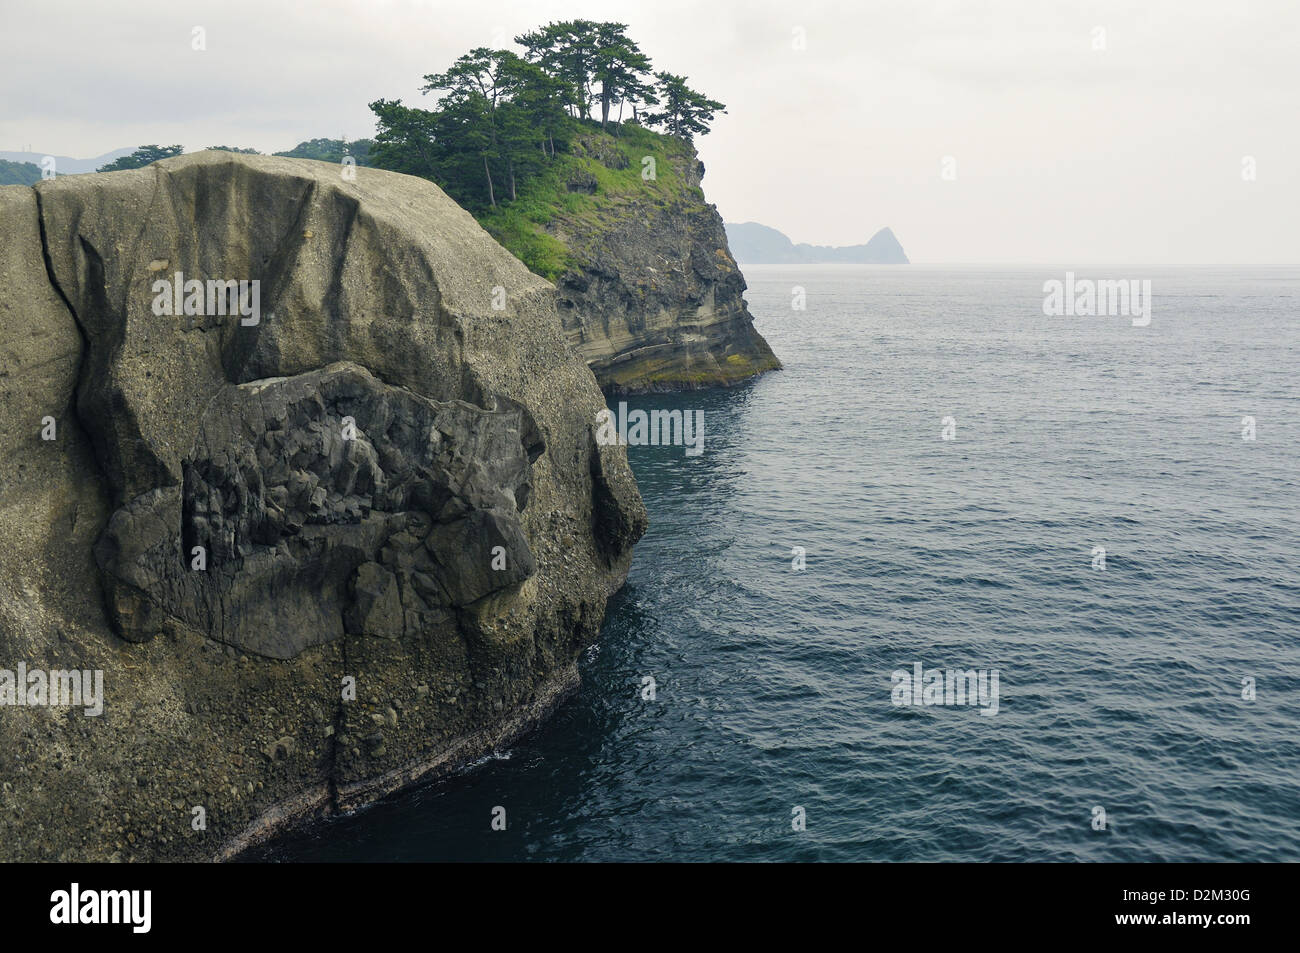 Huge rocks formation shoreline with scenic pine trees on the cliff top on Izu Peninsula in Japan Stock Photo